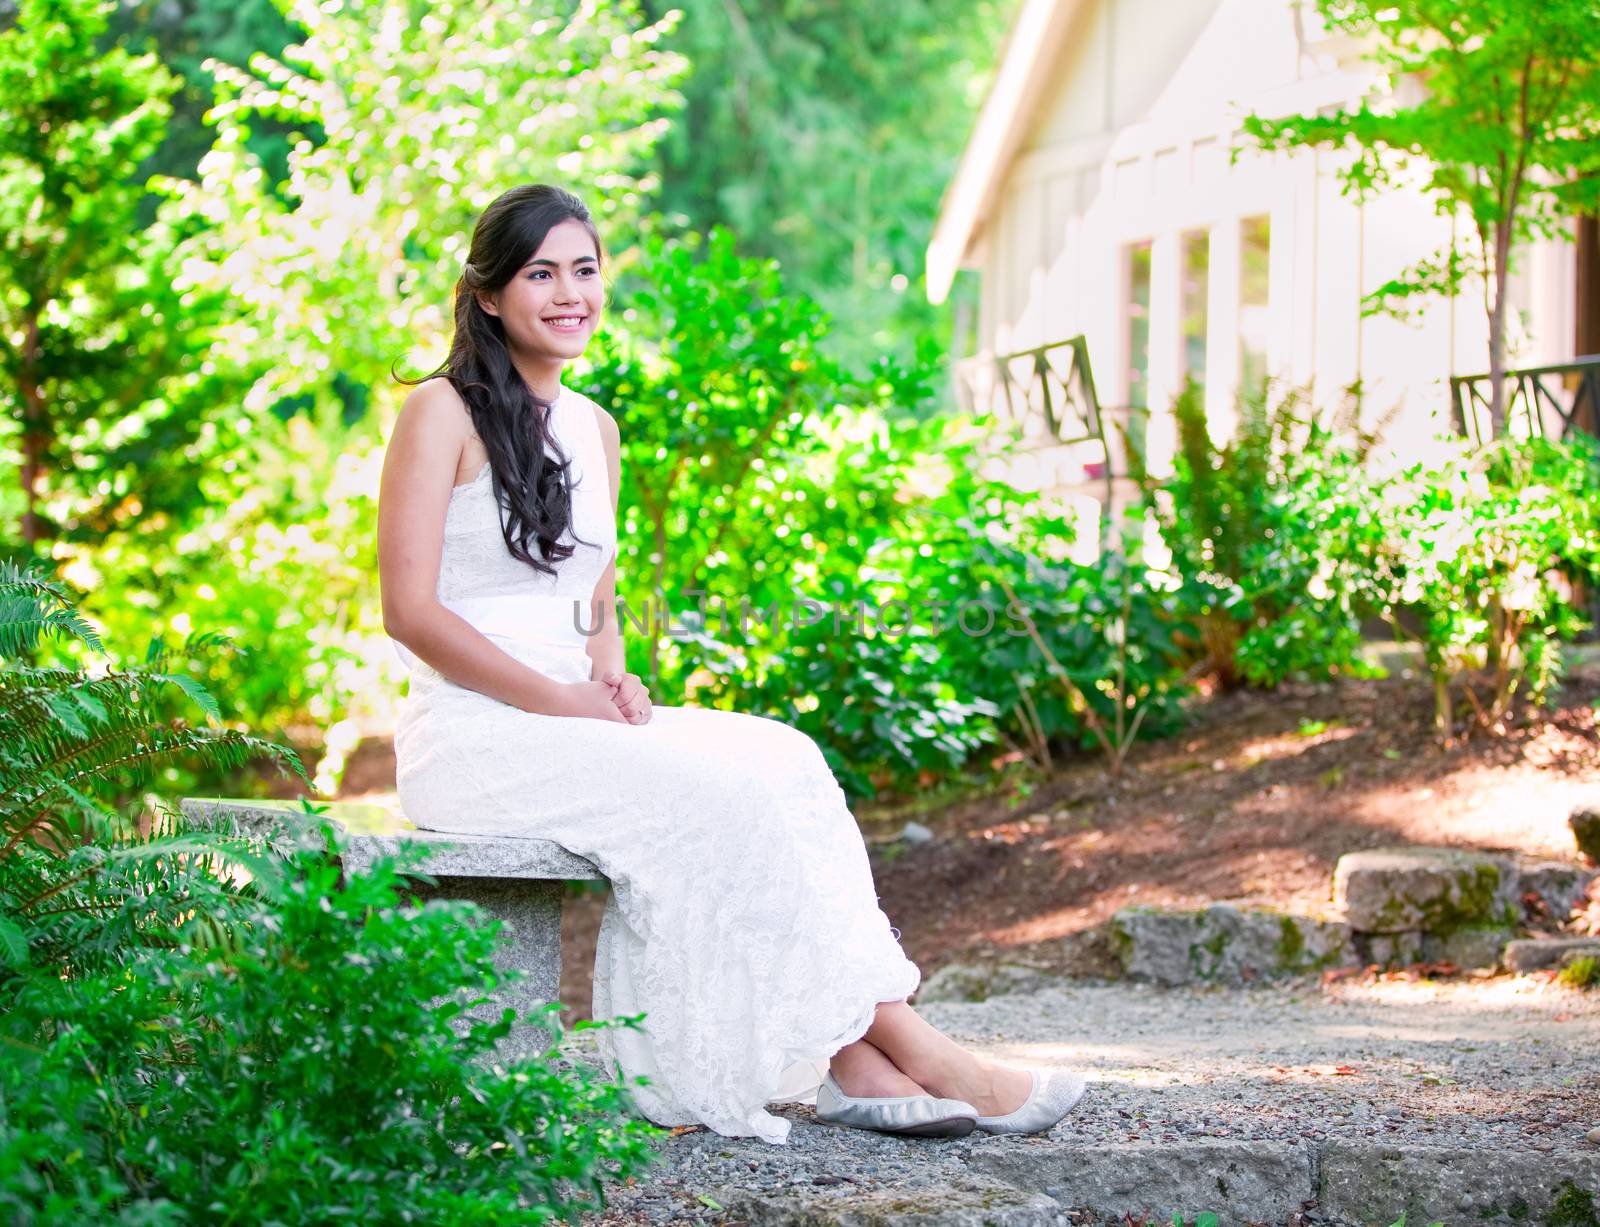 Beautiful biracial bride in white lace wedding dress sitting on bench outdoors, smiling